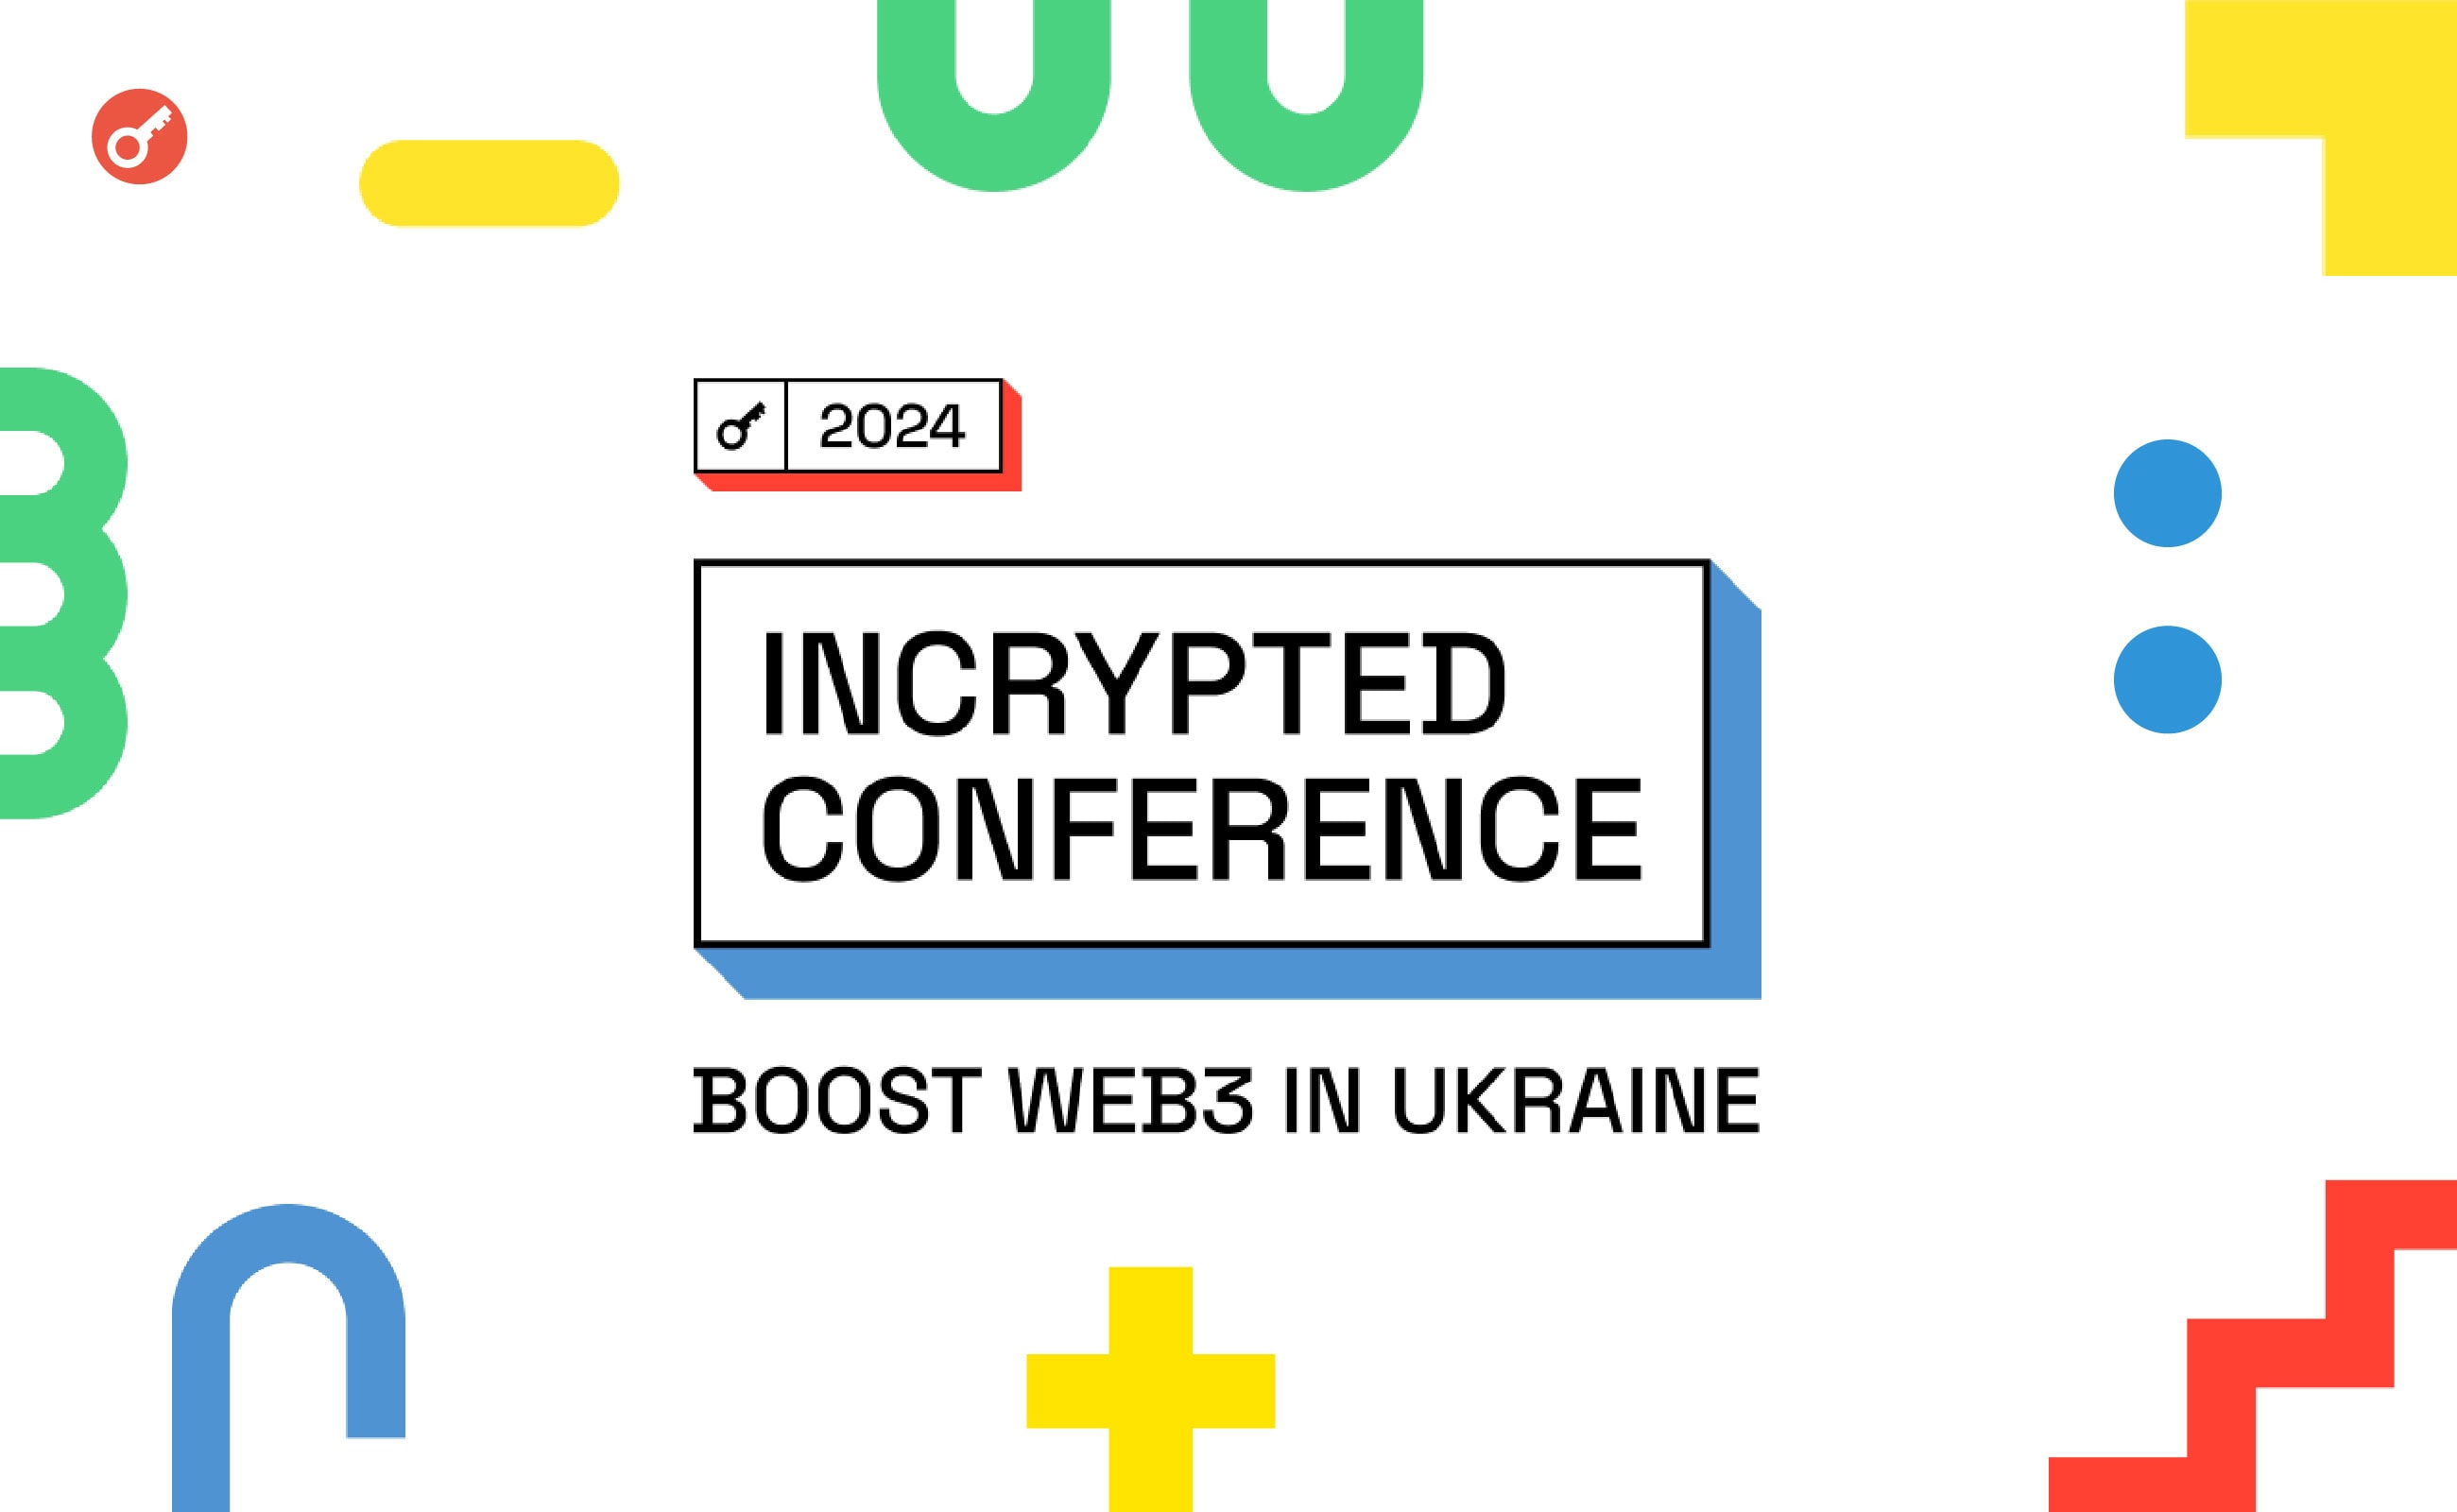 Incrypted Conference 2024 results: over 1500 guests, 30 speakers and Buterin’s arrival. Заглавный коллаж статьи.